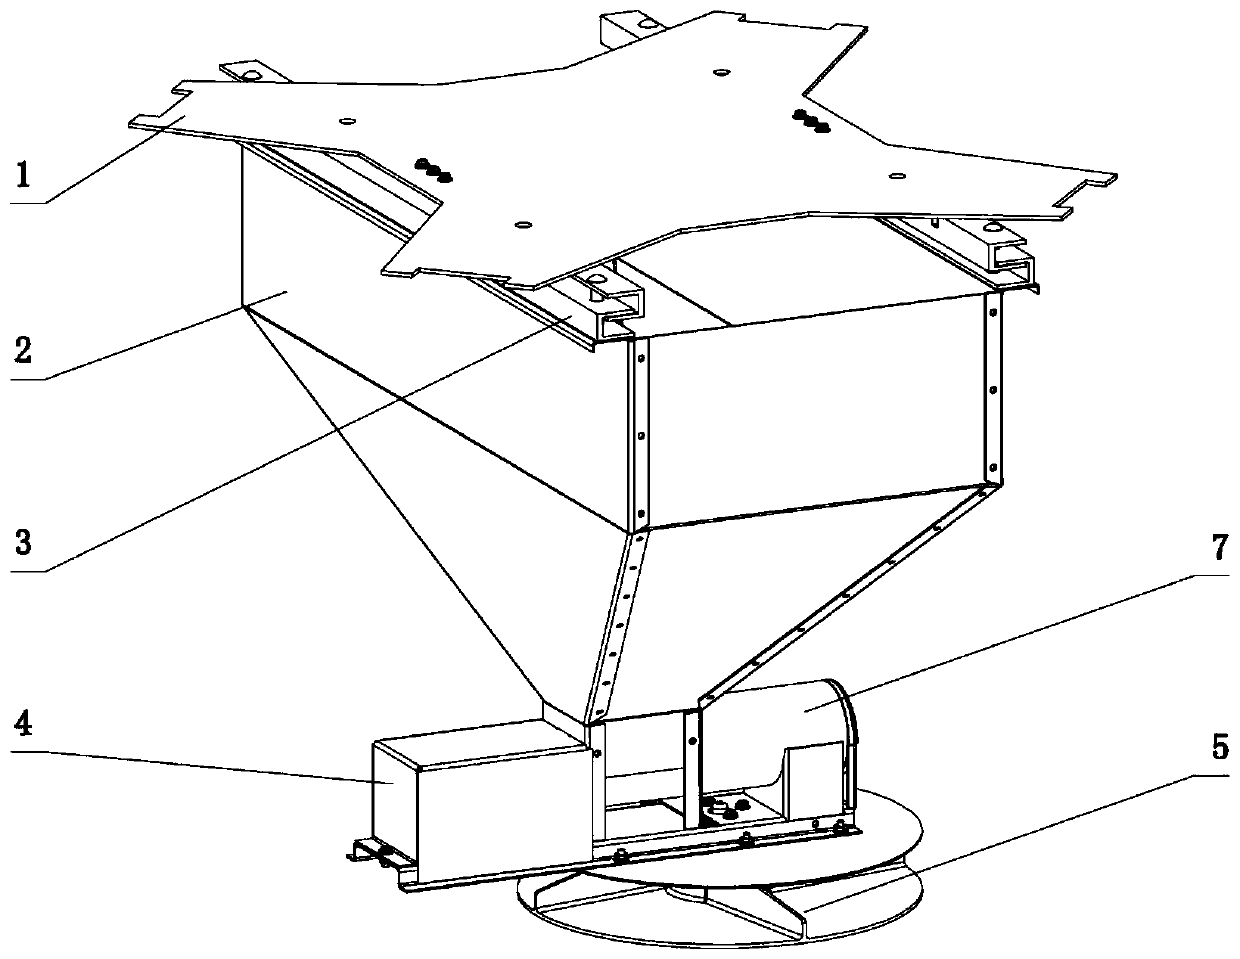 Unmanned aerial vehicle quantitative spreading device and method for green manure seeds